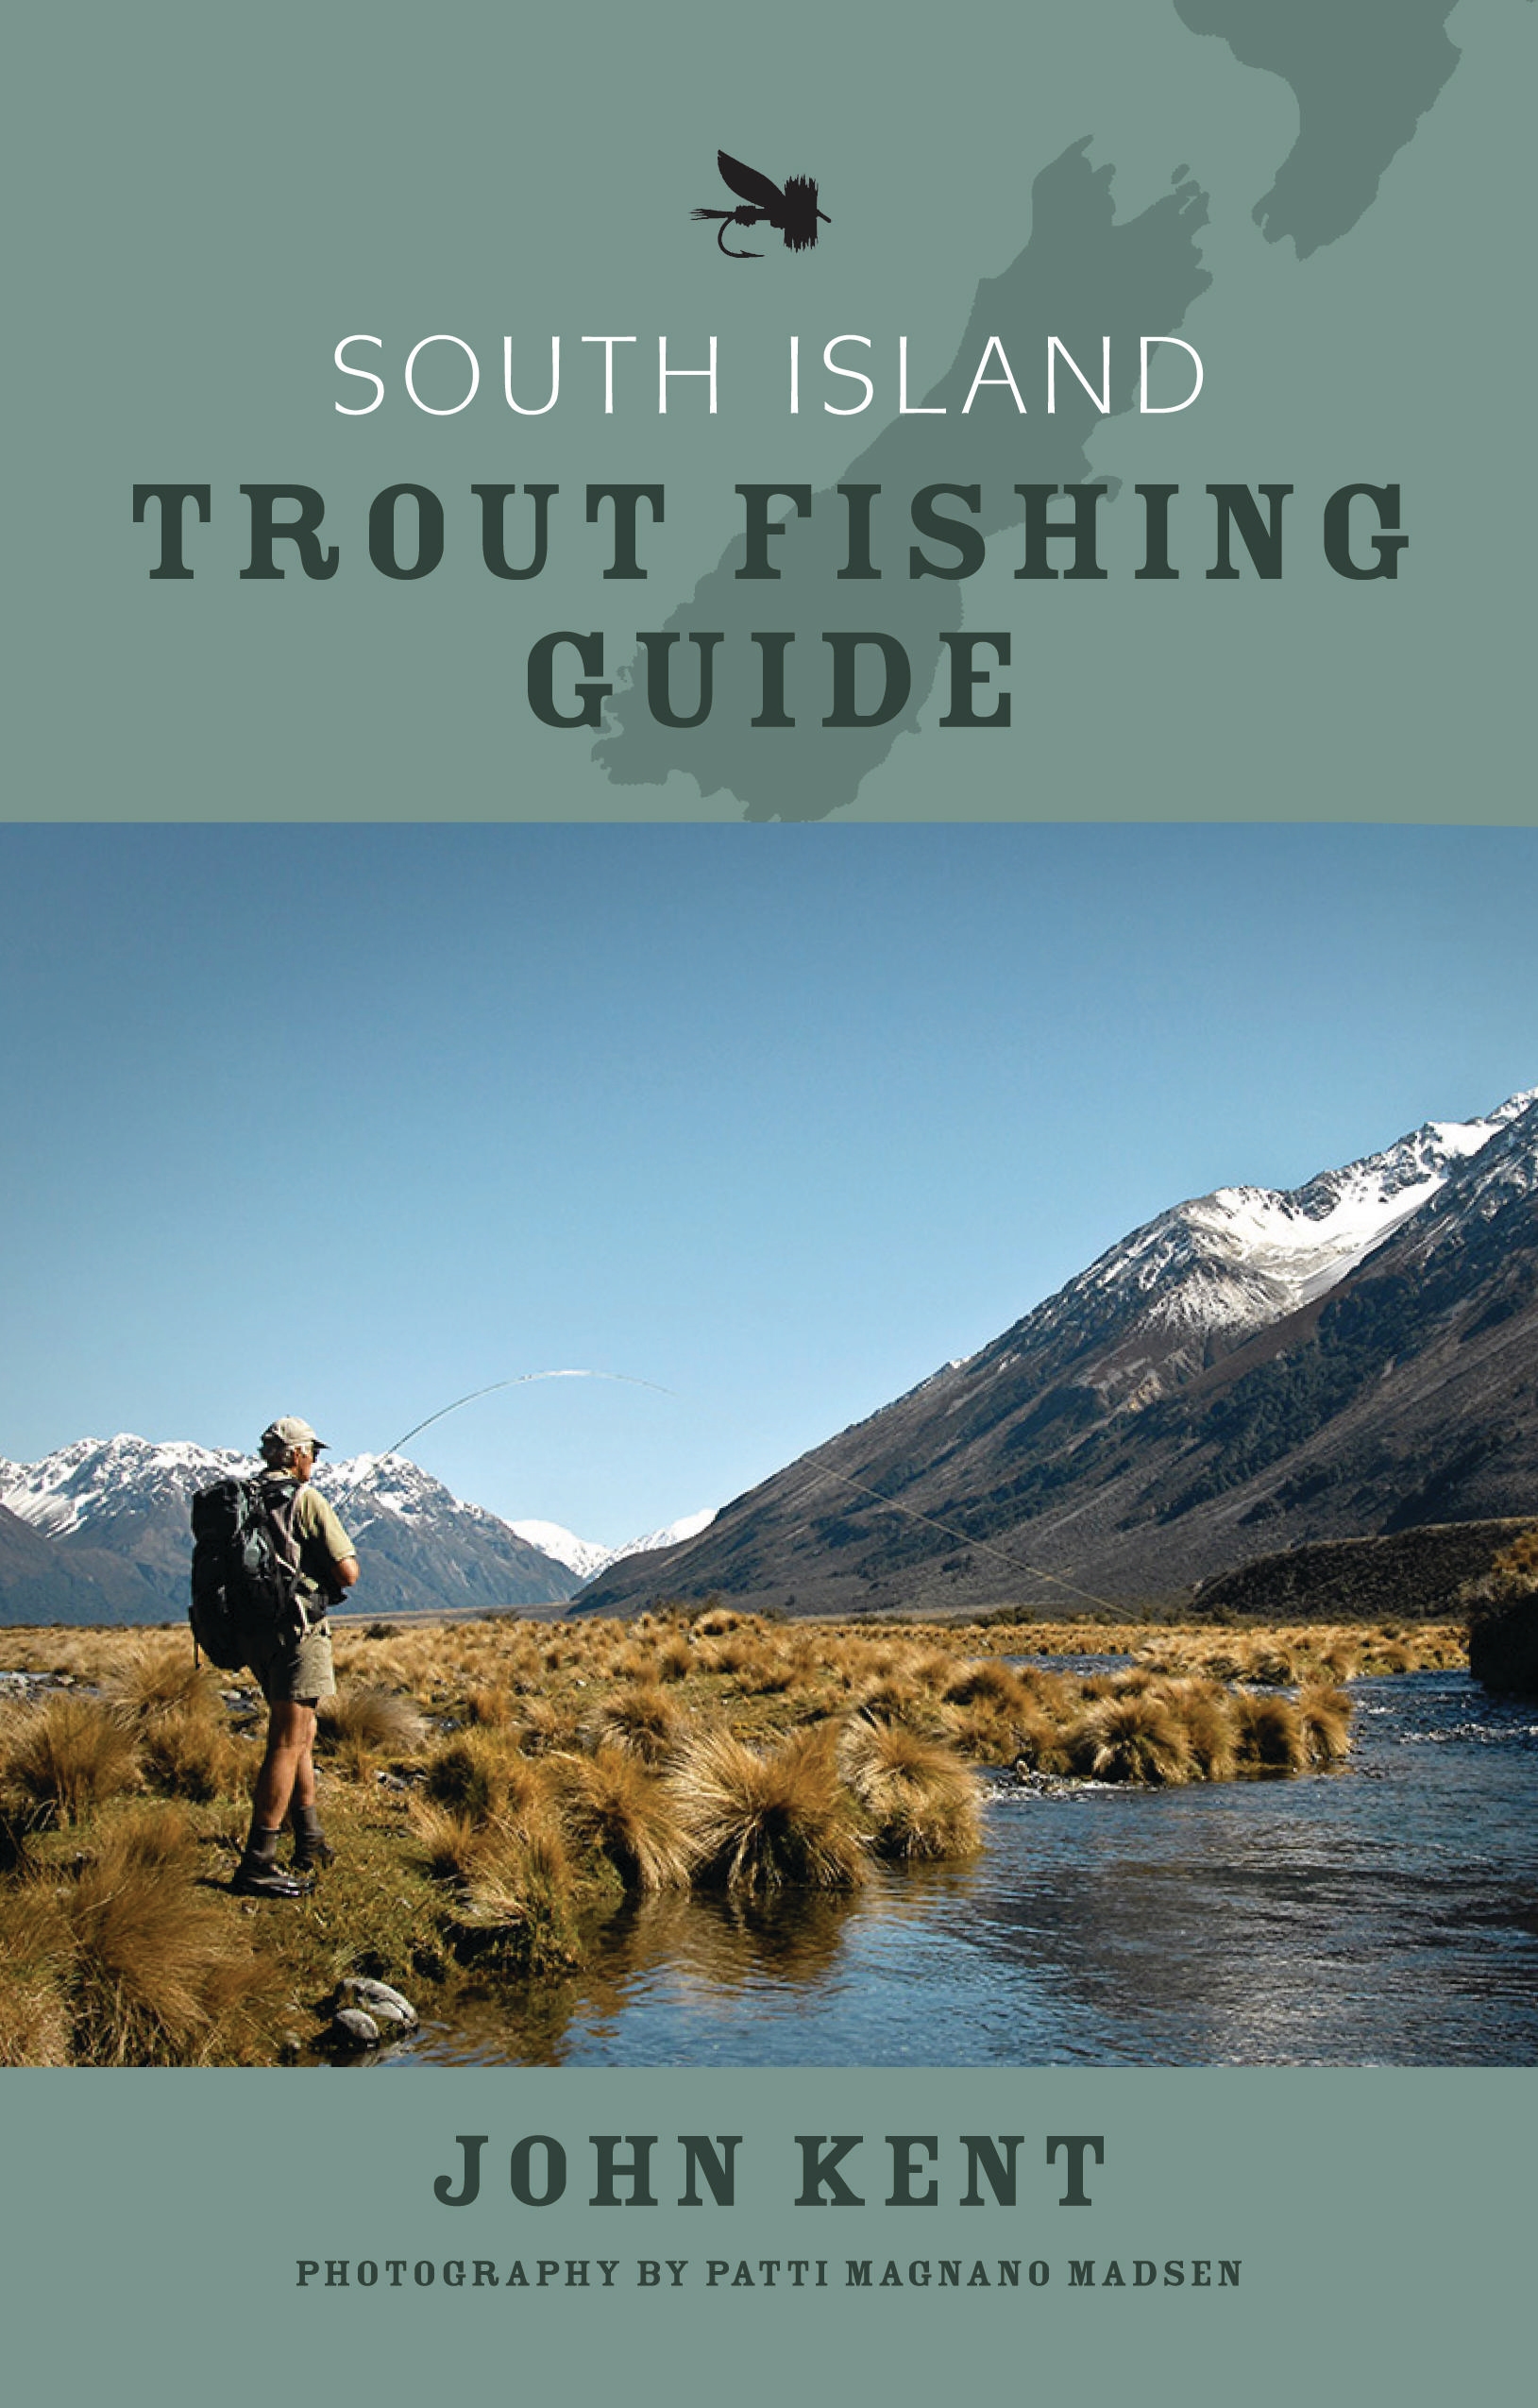 South Island Trout Fishing Guide by John Kent - Penguin Books New